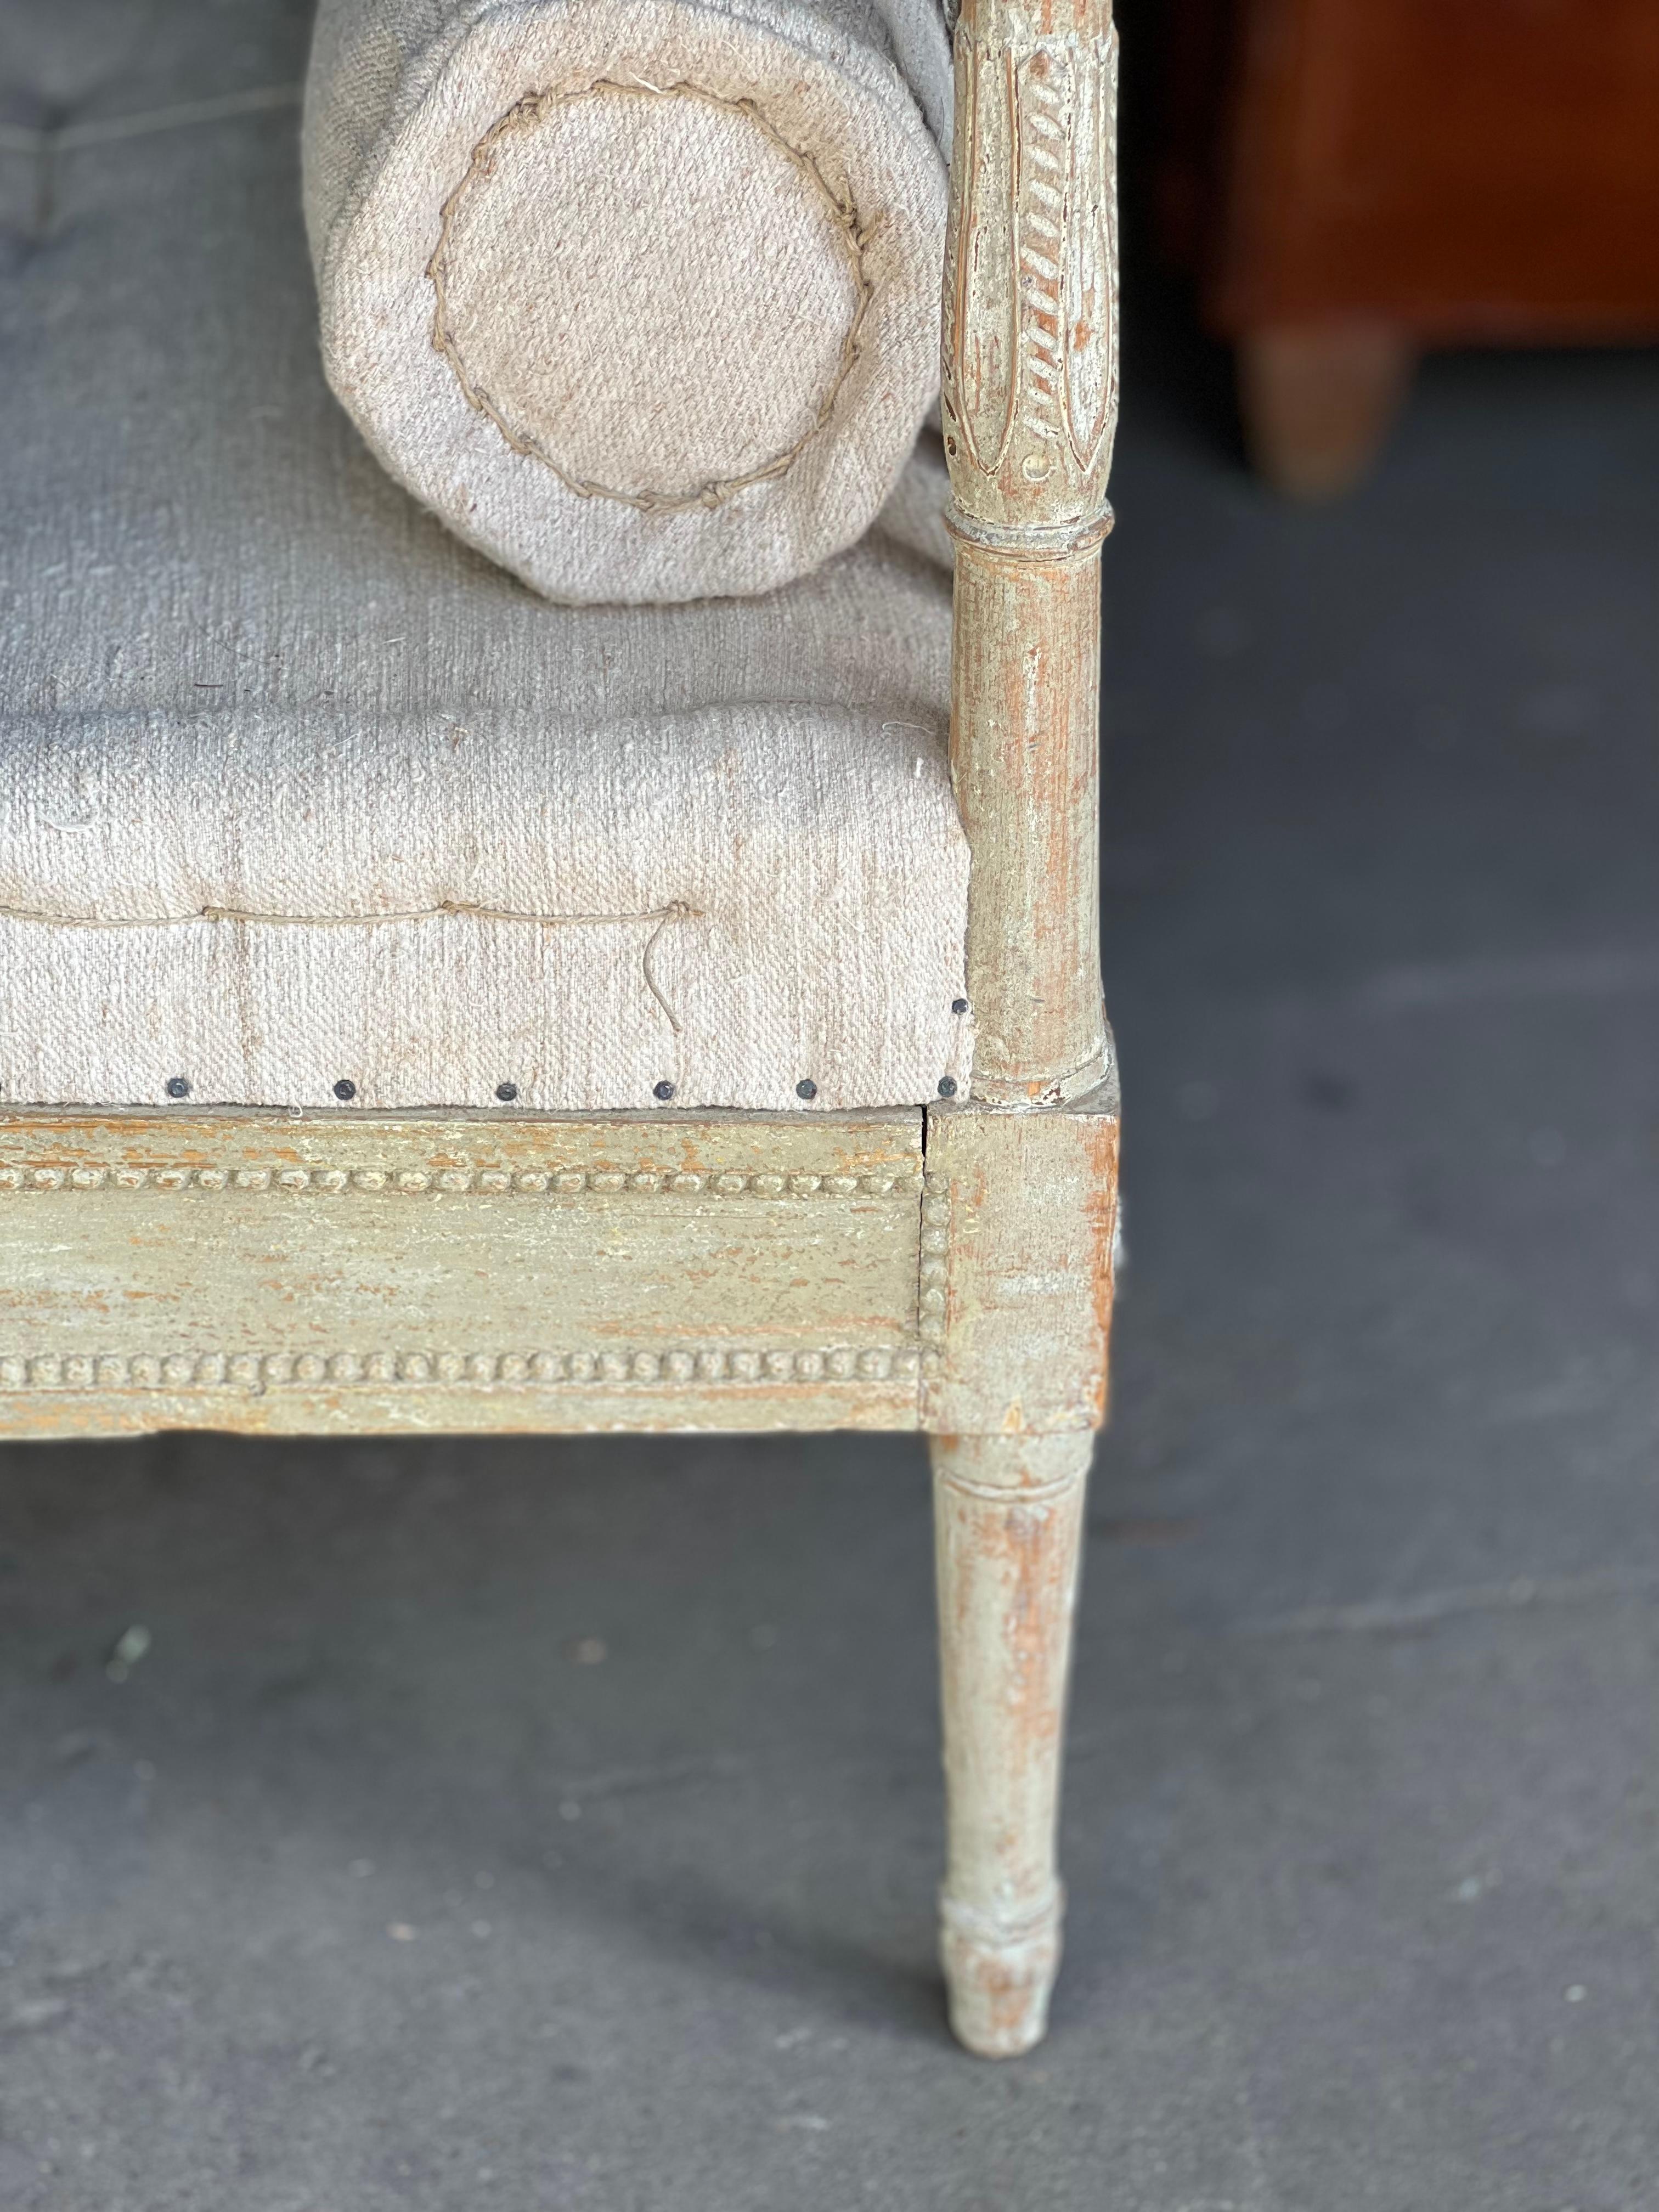 Beautiful 19th century Gustavian Daybed. Dryscrapped and has been carefully reupholstered with a primitive Belgian linen. It comes with back wooden slats and custom cushions to convert into a sofa if one chooses too which shows how it can be put